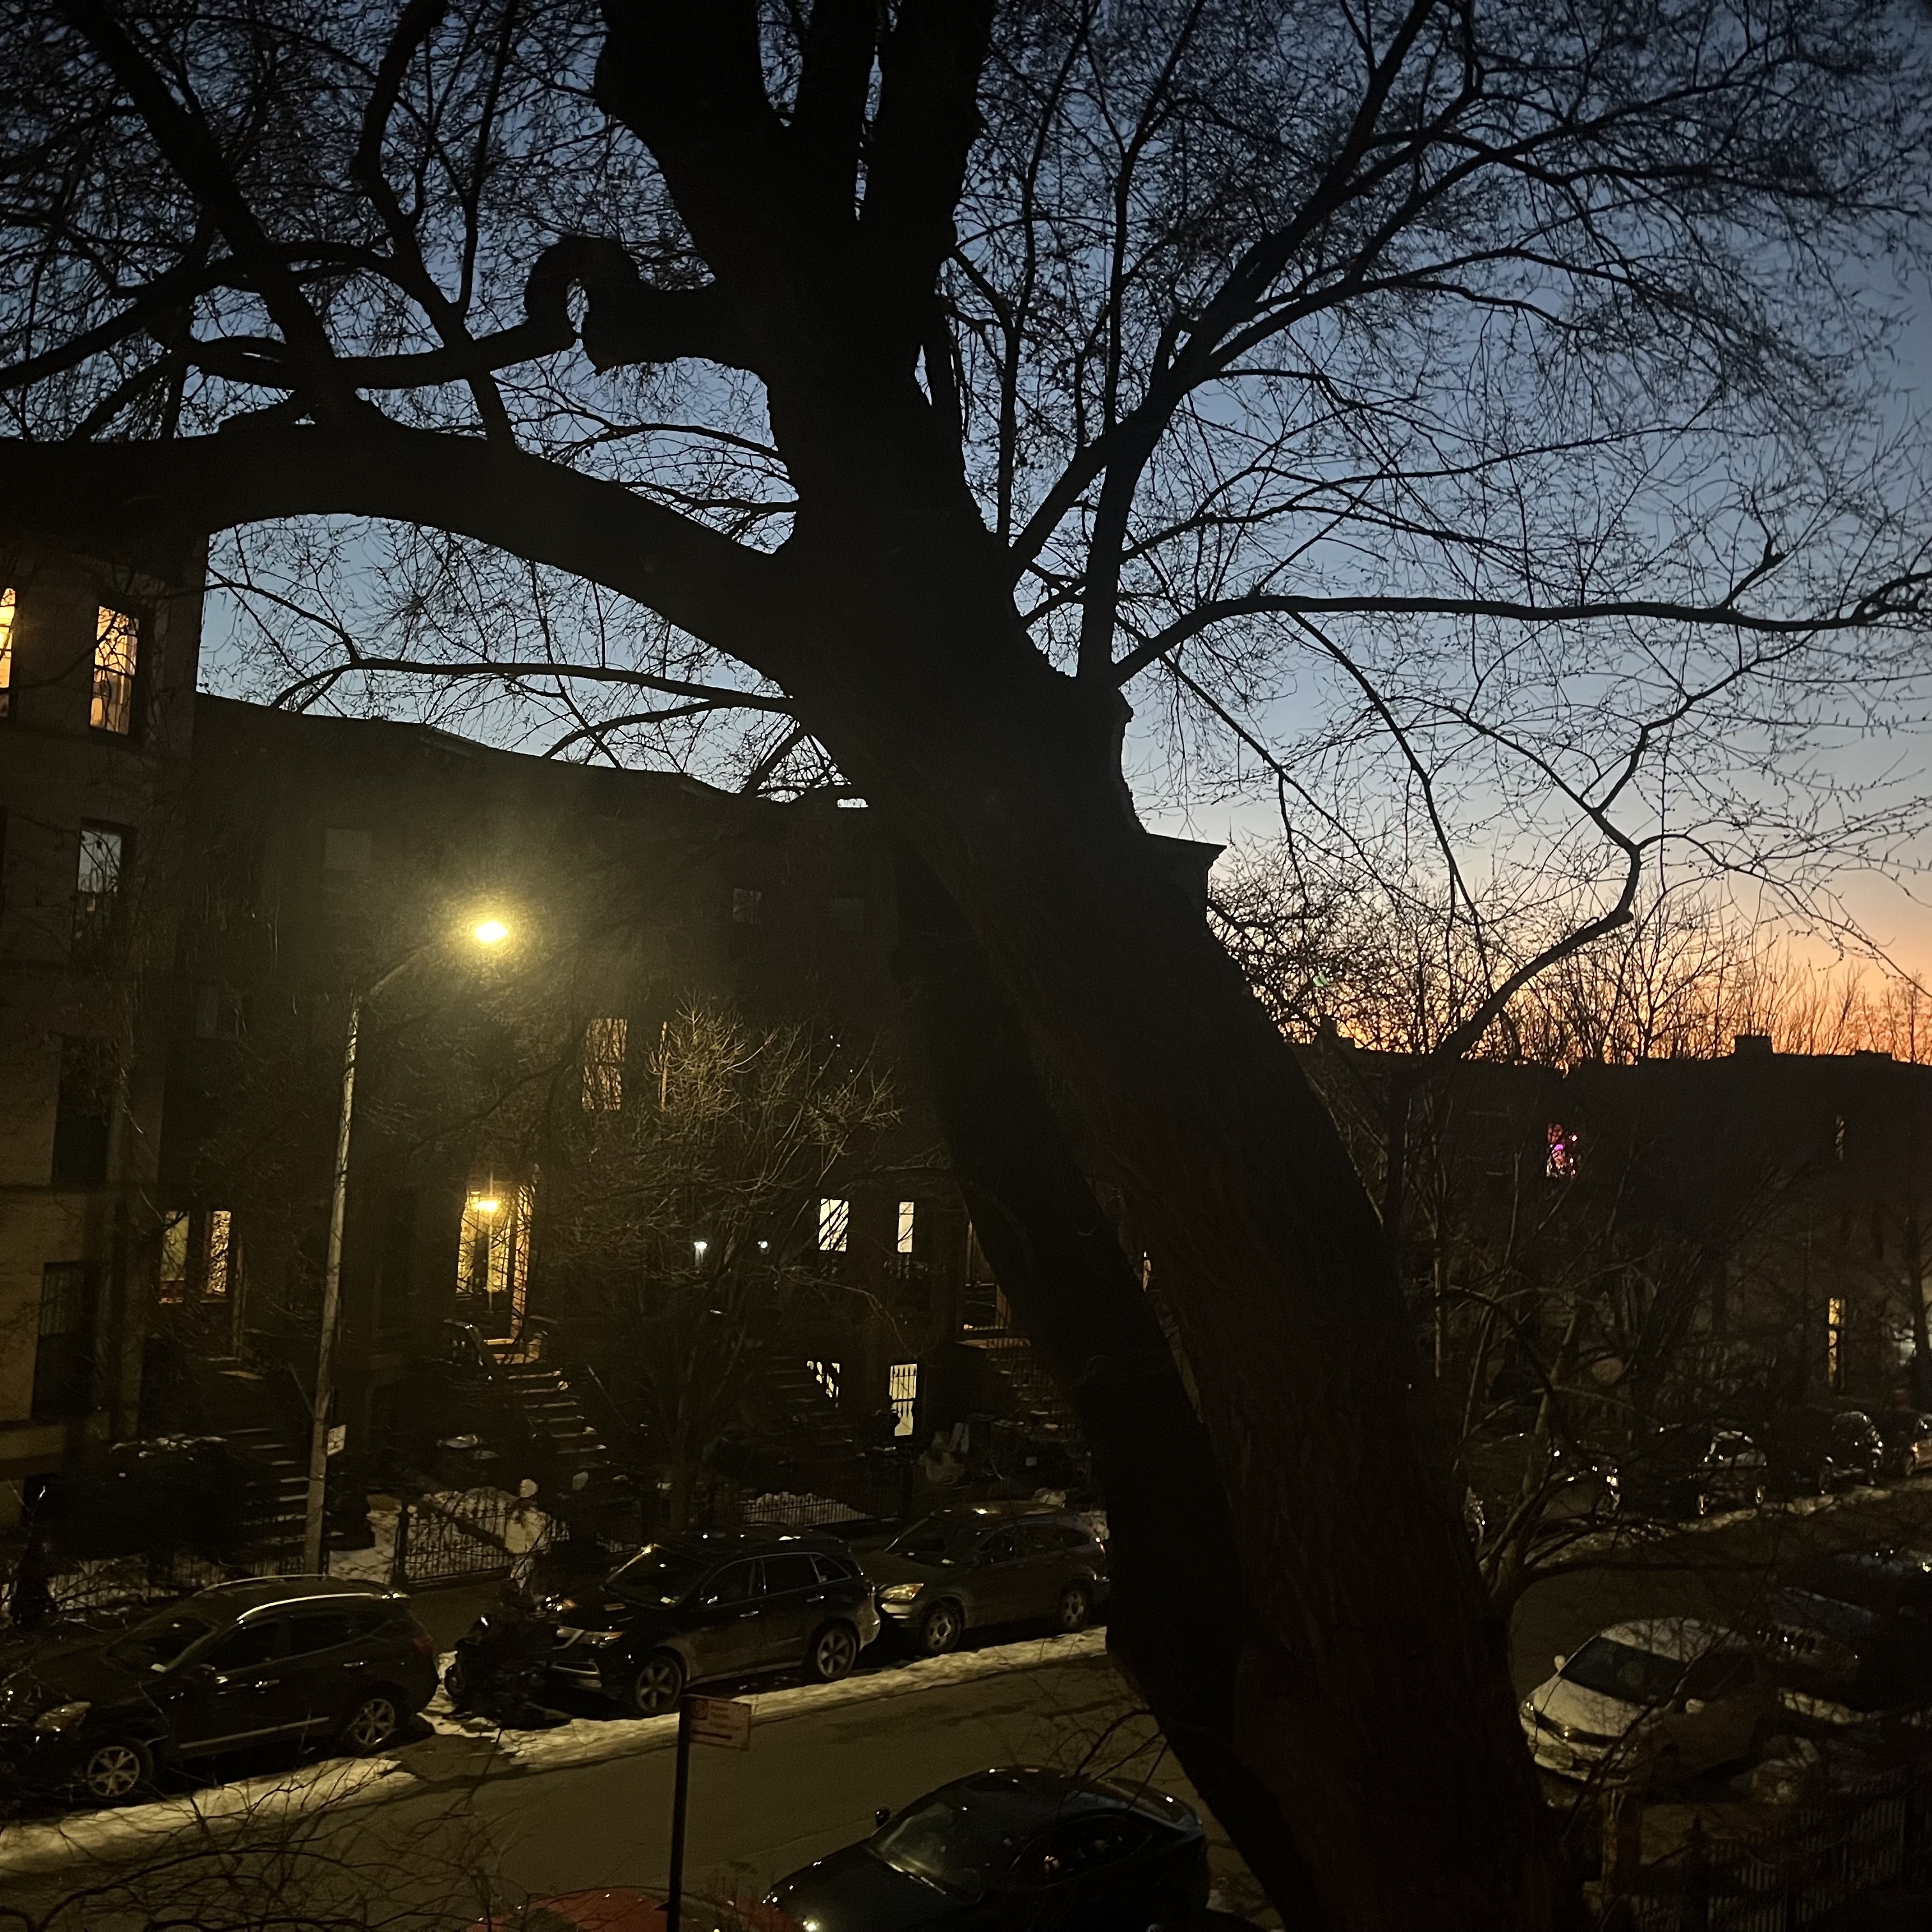 Sunset view. Prospect Heights, Brooklyn.